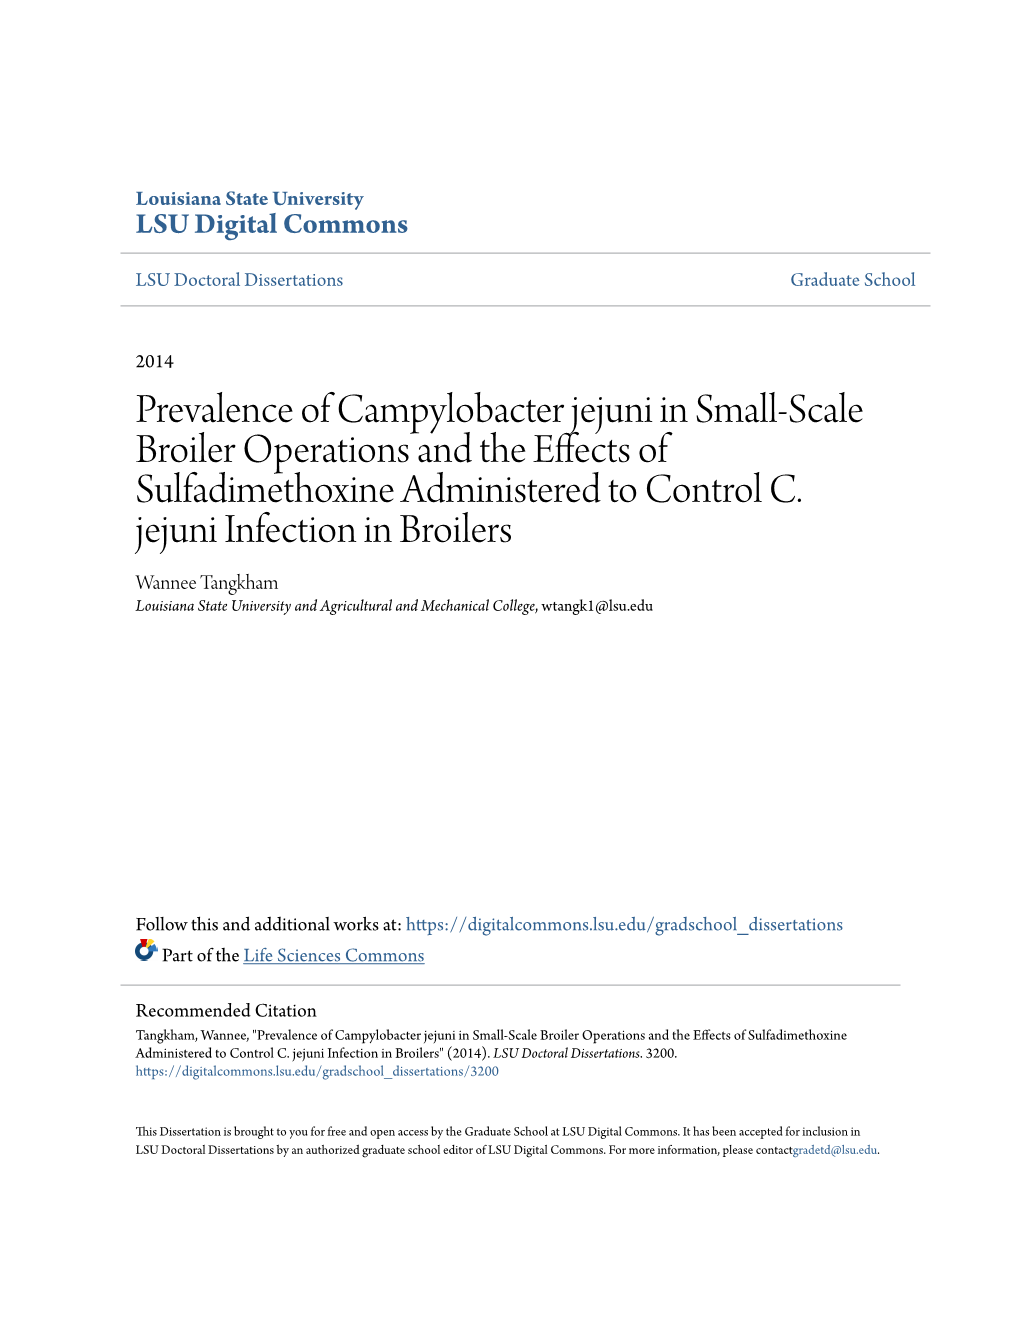 Prevalence of Campylobacter Jejuni in Small-Scale Broiler Operations and the Effects of Sulfadimethoxine Administered to Control C